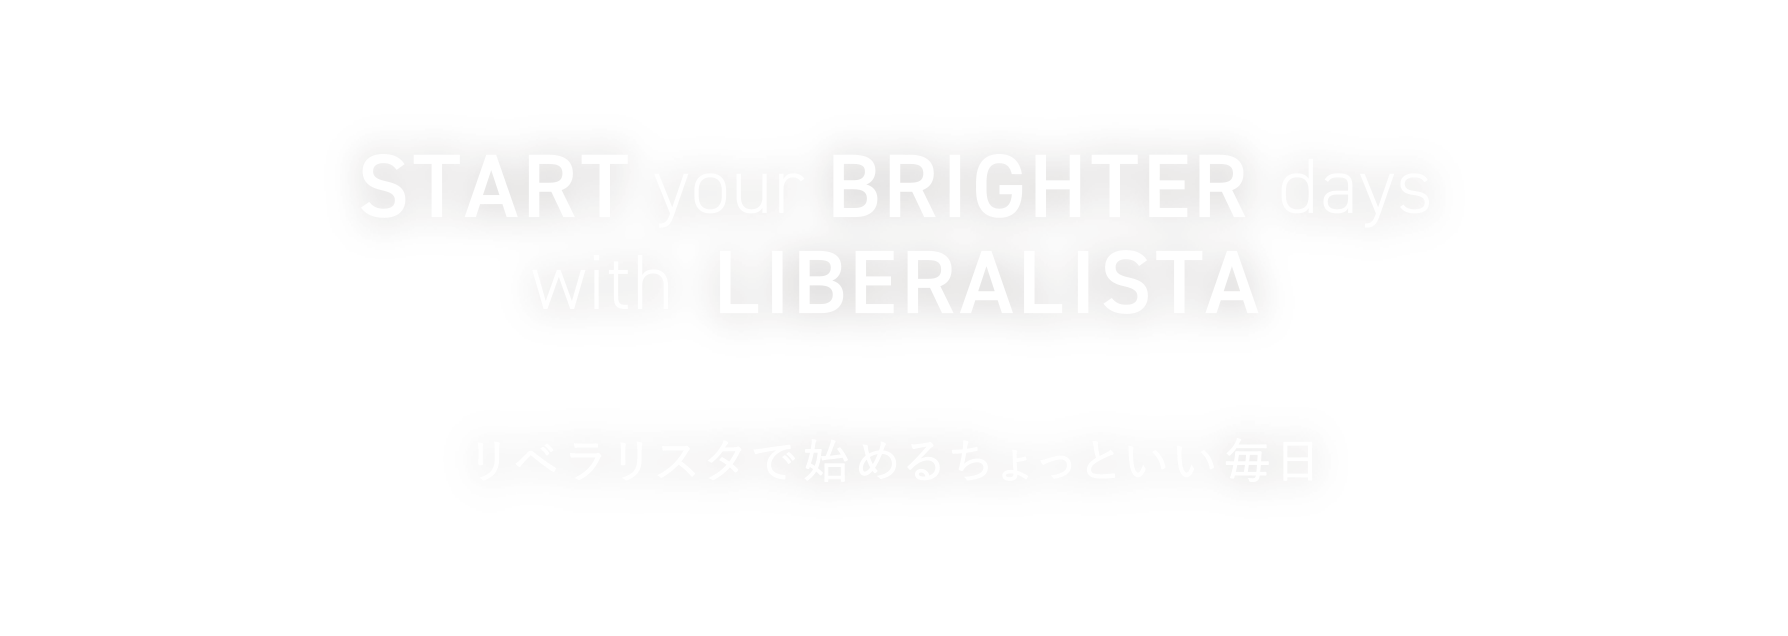 Start your brighter days with  LIBERALISTA リベラリスタで始めるちょっといい毎日